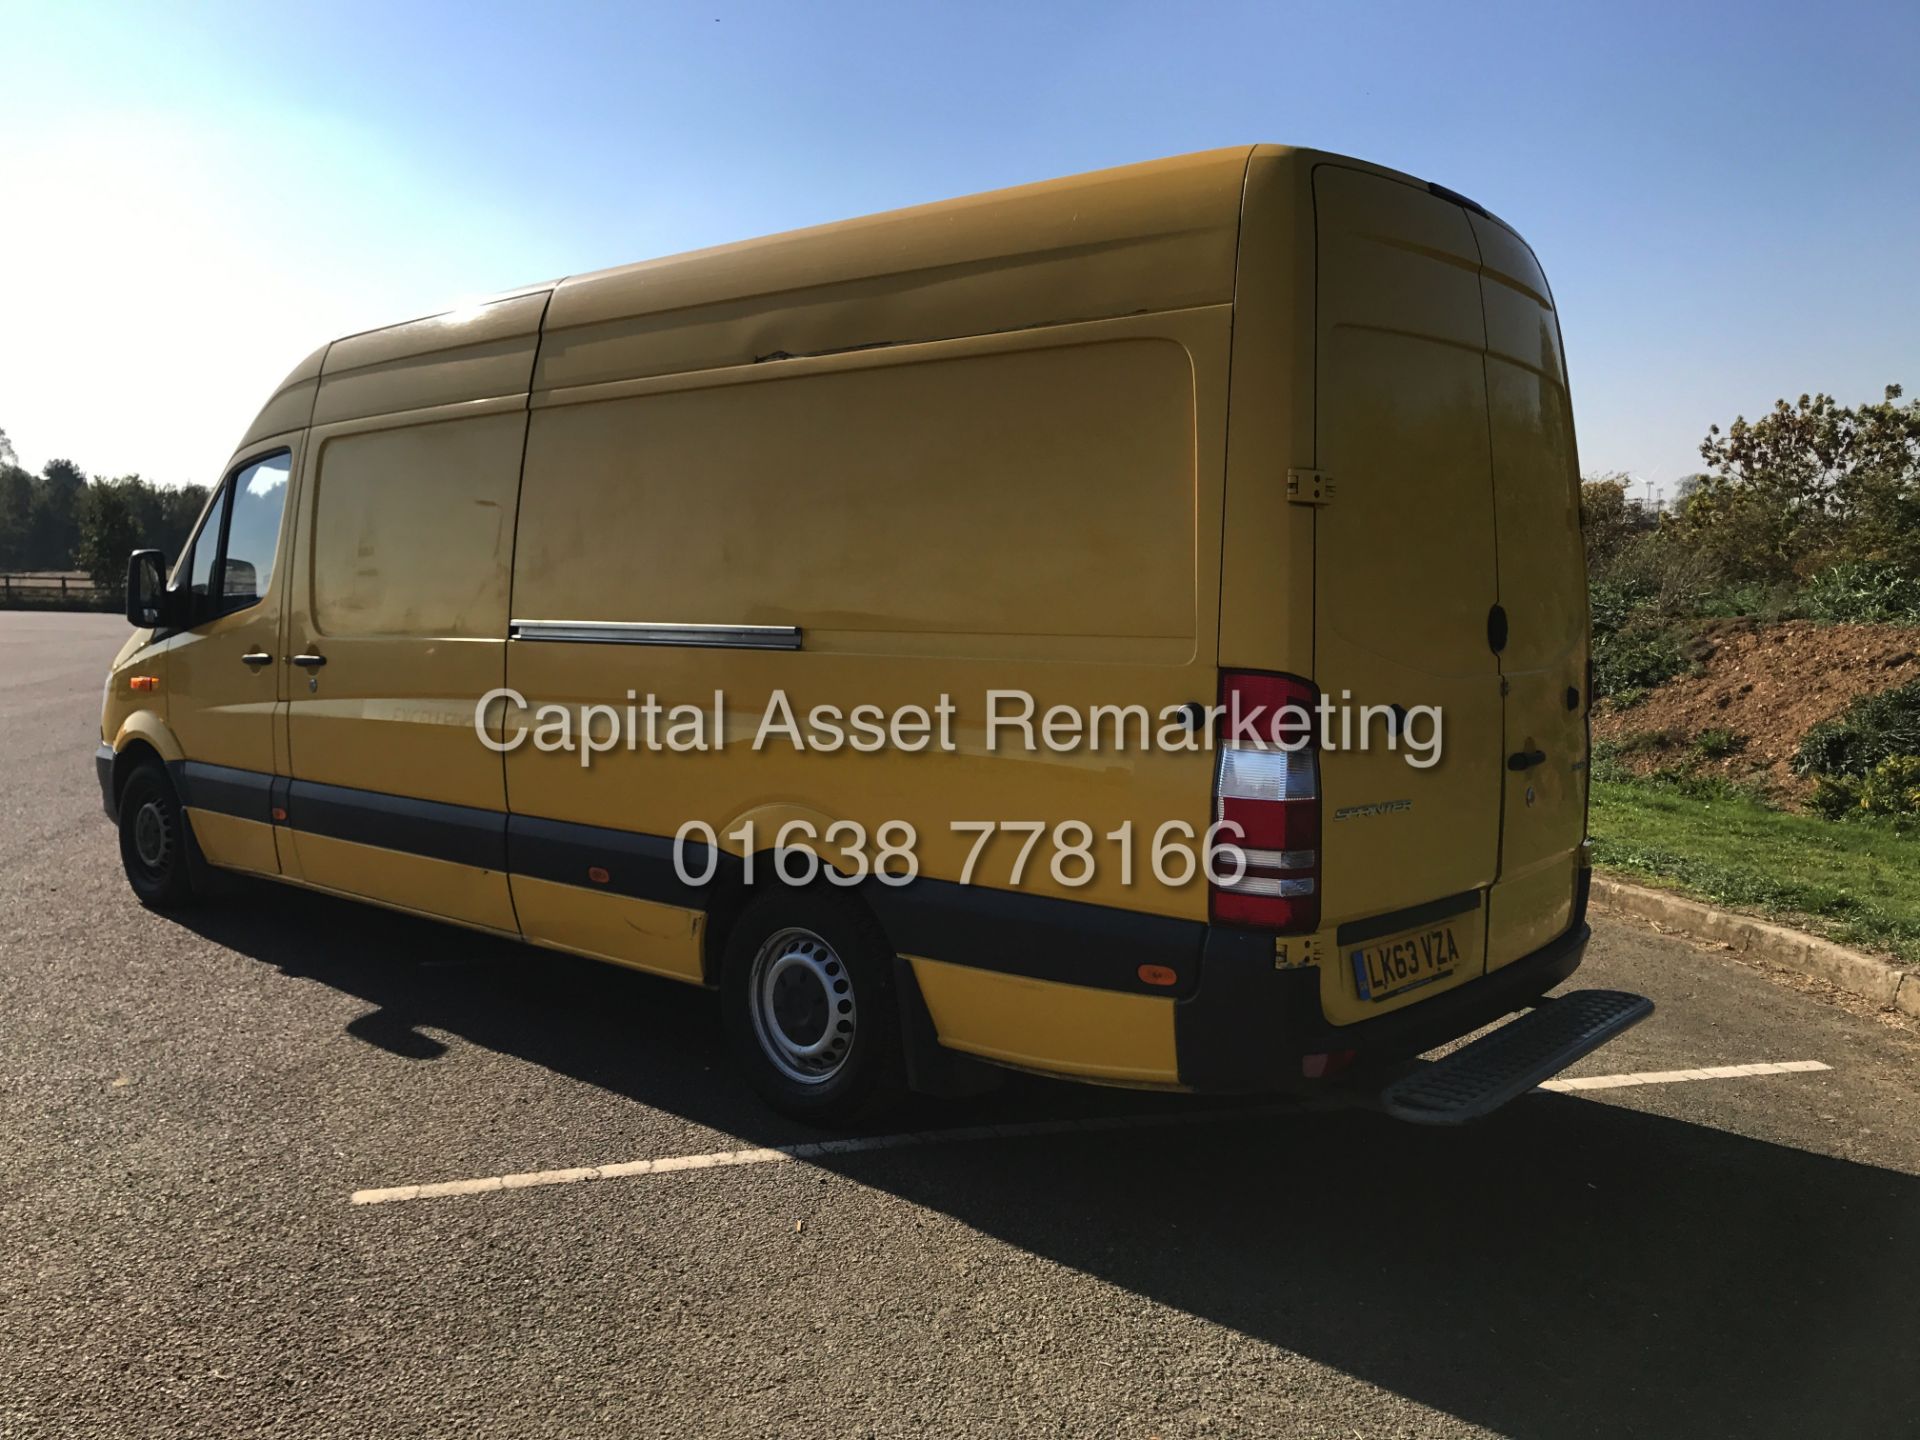 MERCEDES SPRINTER 313CDI "130BHP - 6 SPEED" 1 OWNER (2014 MODEL - NEW SHAPE) AIR CON - ELEC PACK - Image 7 of 15